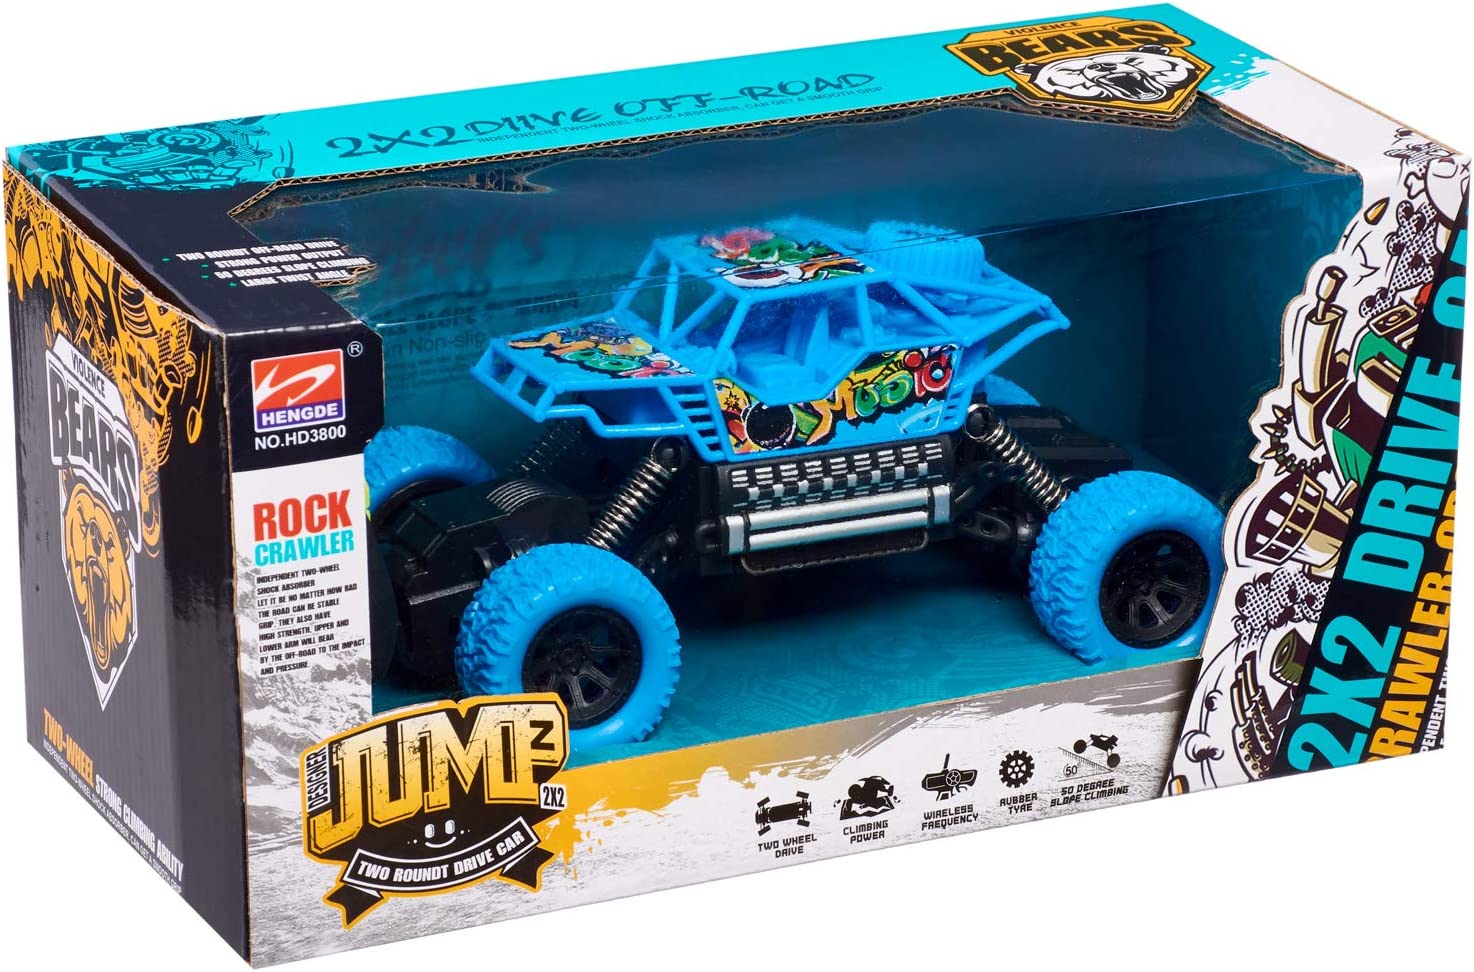 4 x 4 Off-Road Blue Rock Crawler RC For Kids